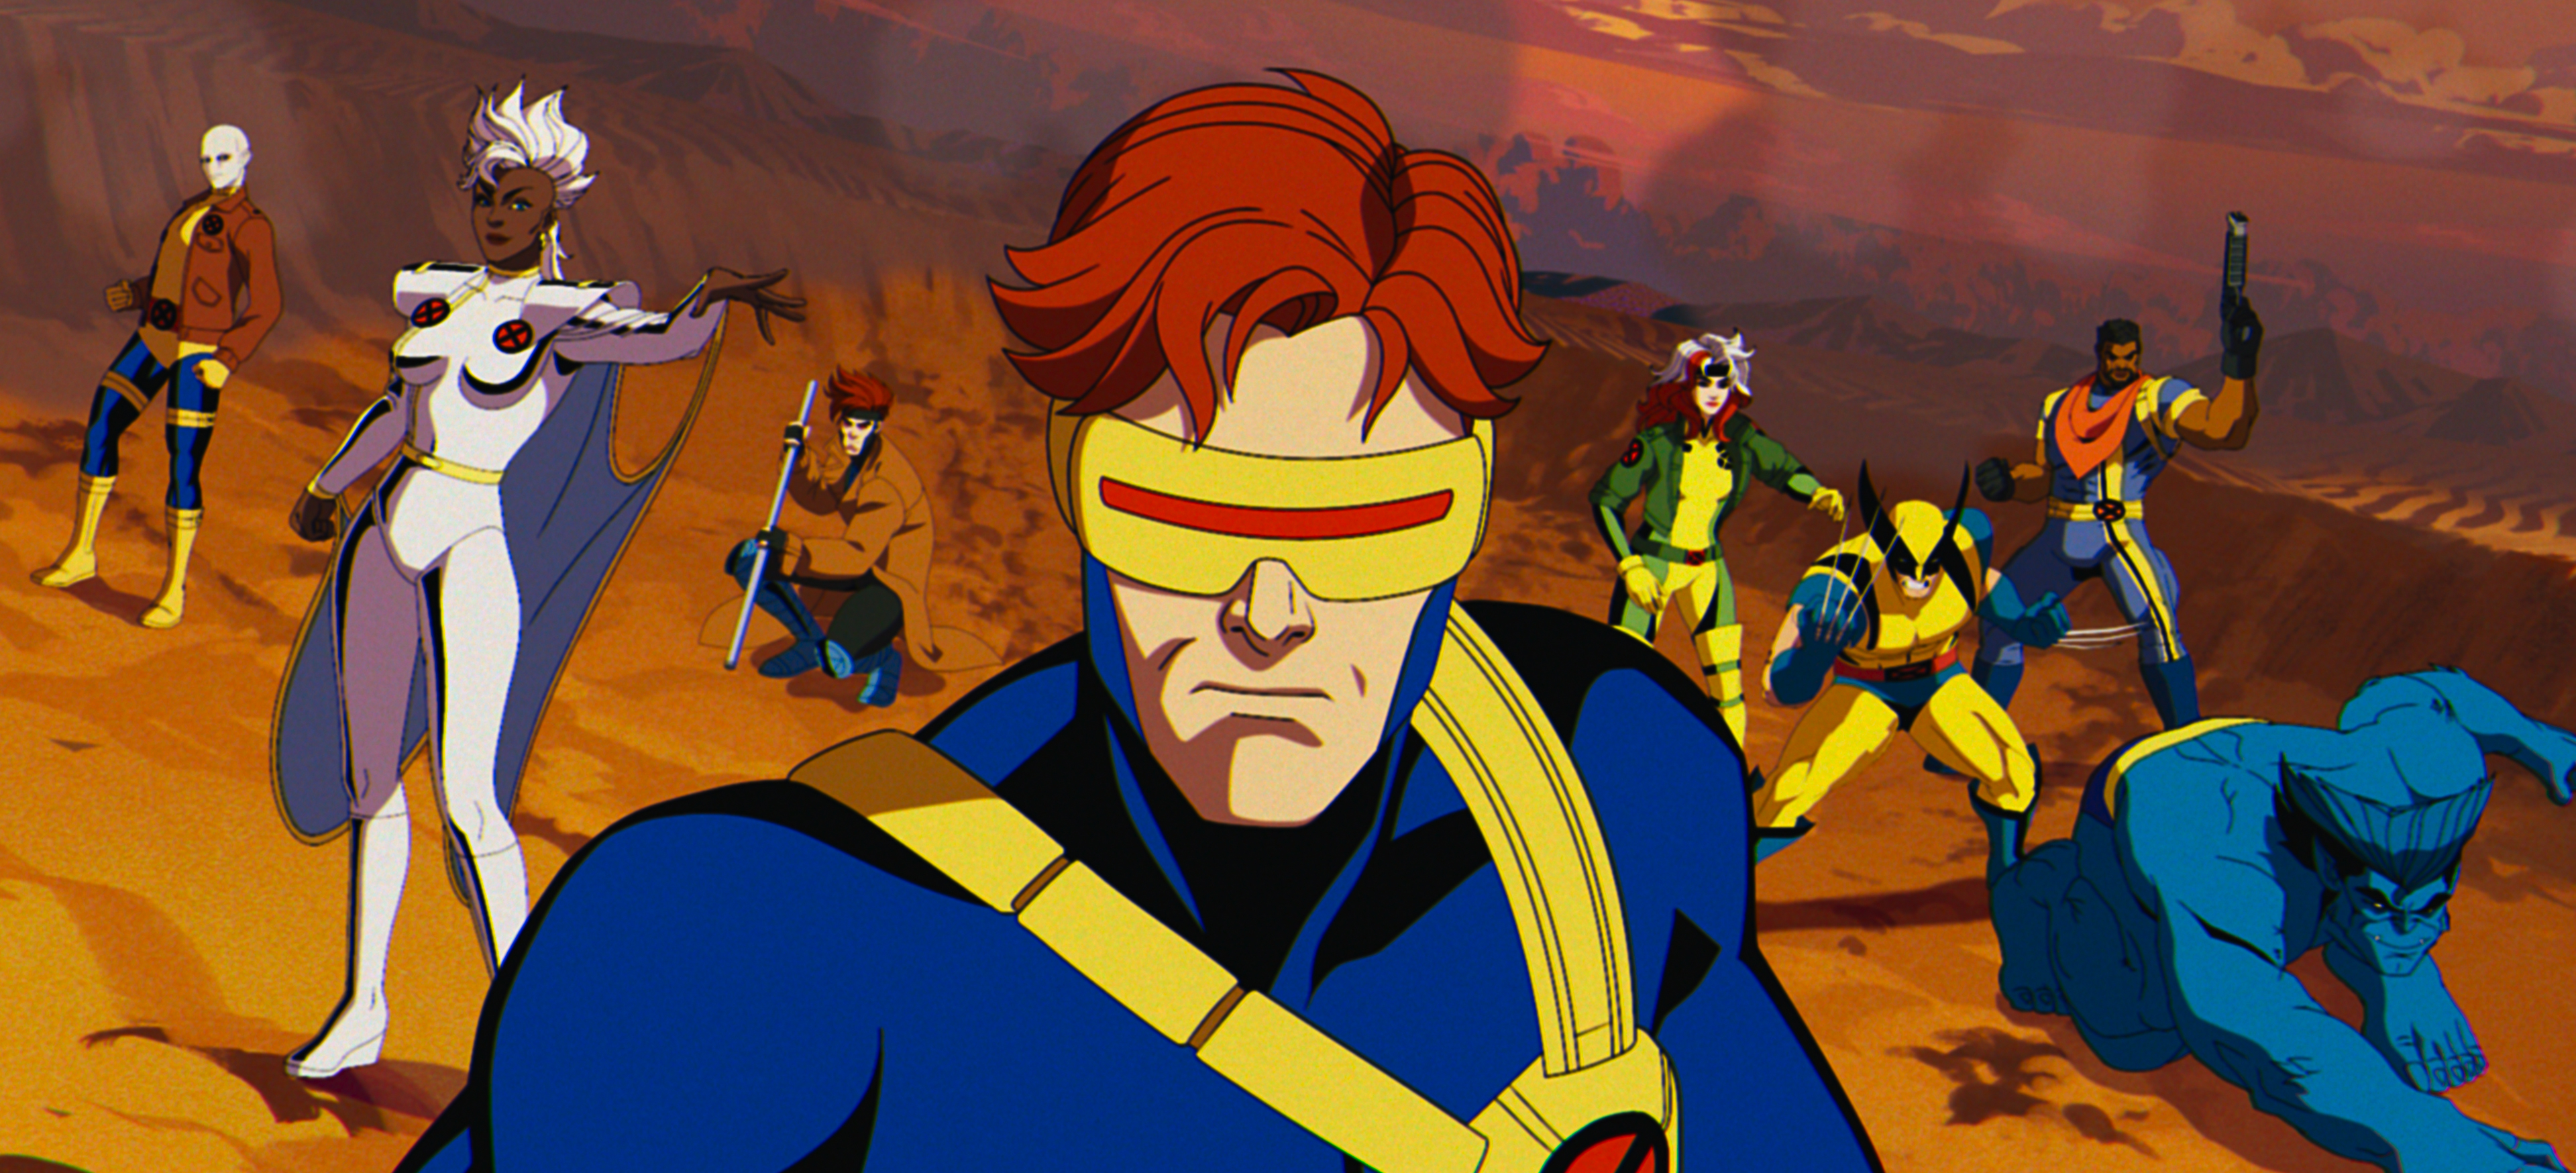 Animated X-Men characters standing heroically, including Cyclops in the center